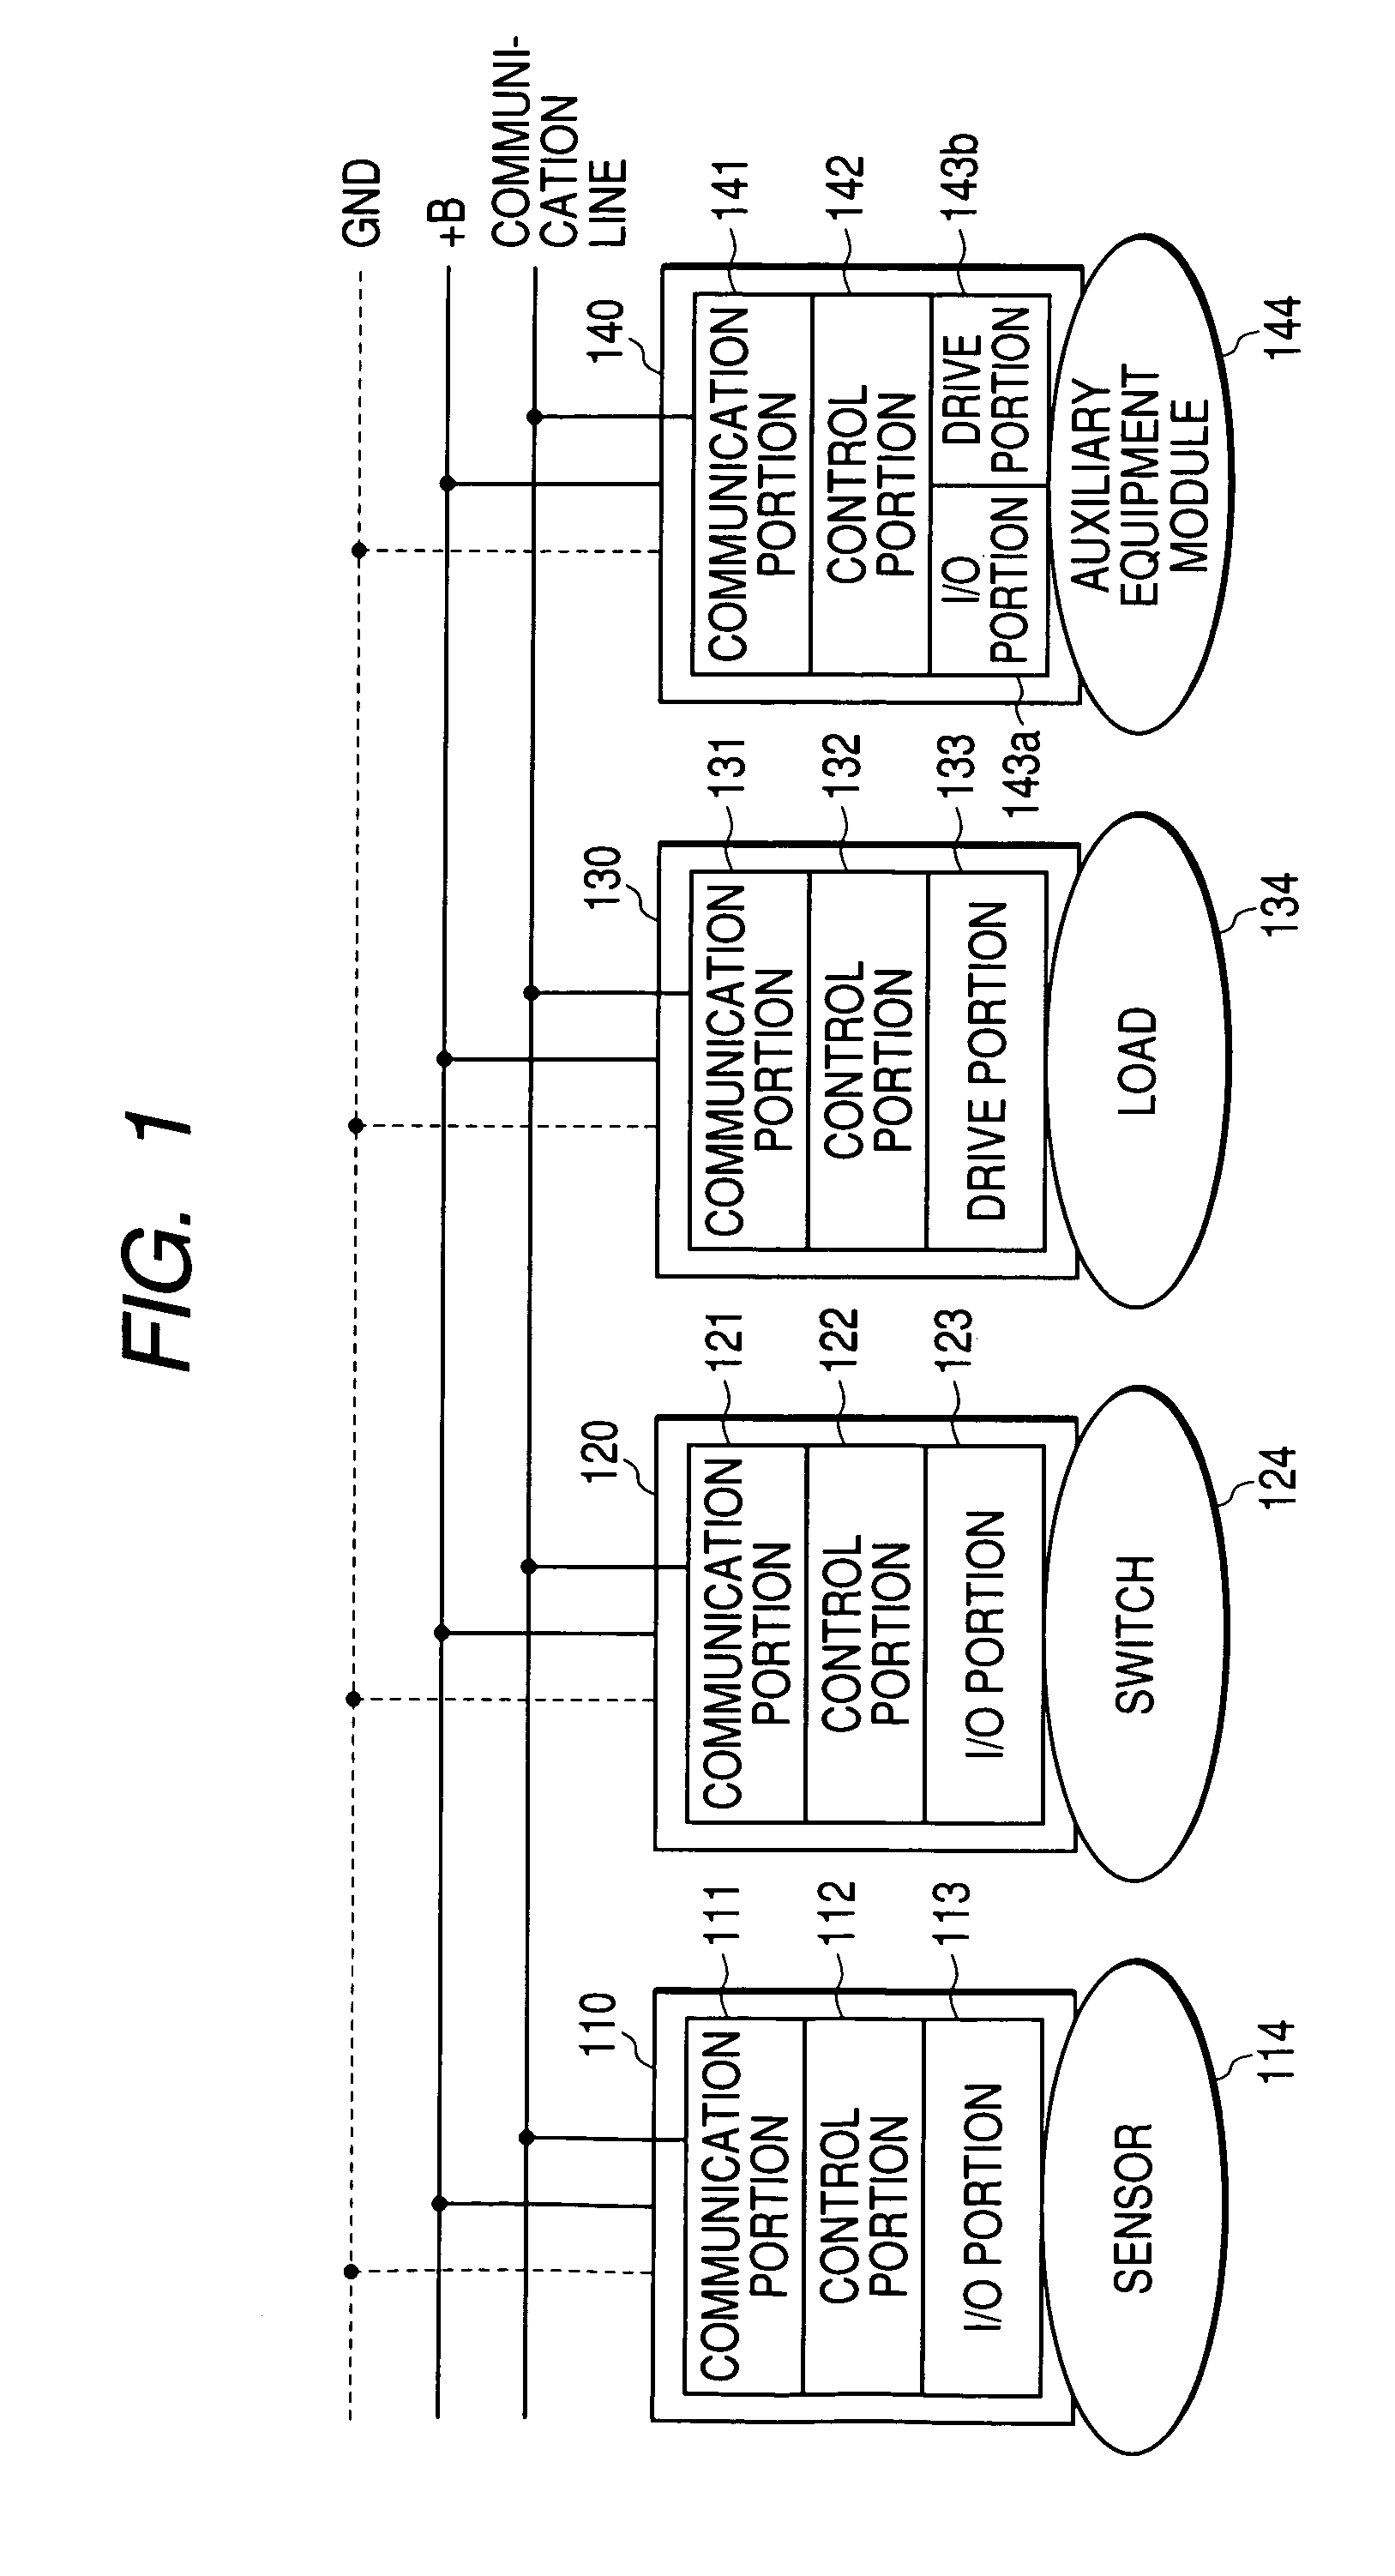 Method of communicating a signal from a sensor, connected to a connector, to an auxiliary module